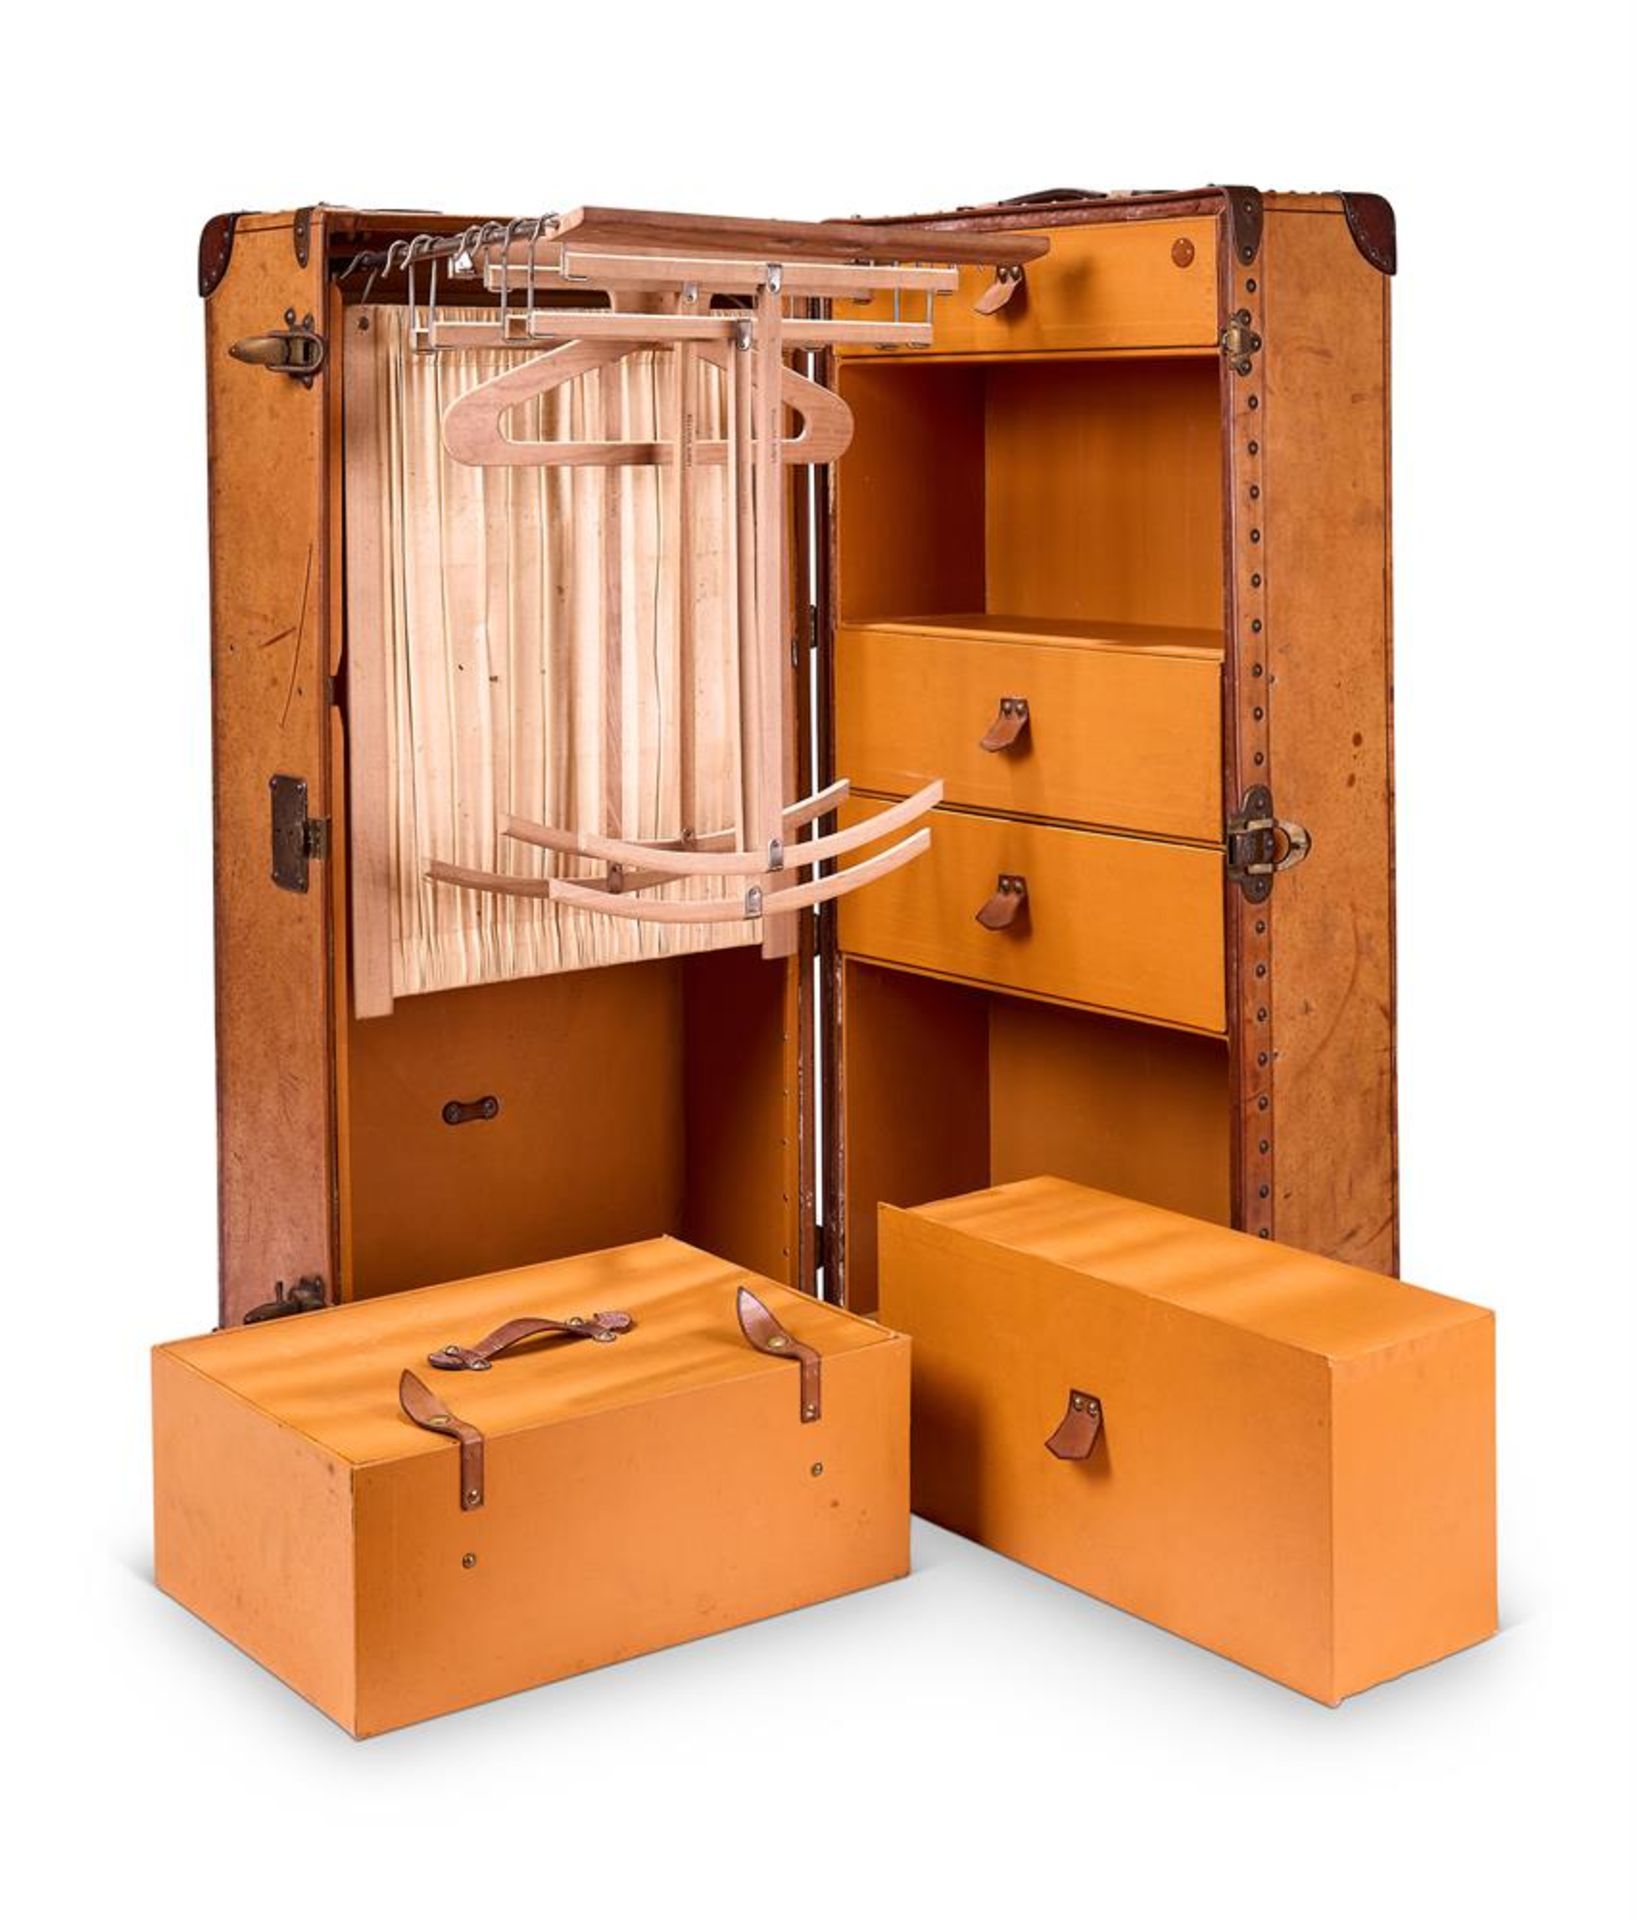 LOUIS VUITTON, A BROWN LEATHER WARDROBE STEAMER TRUNK - Image 4 of 5